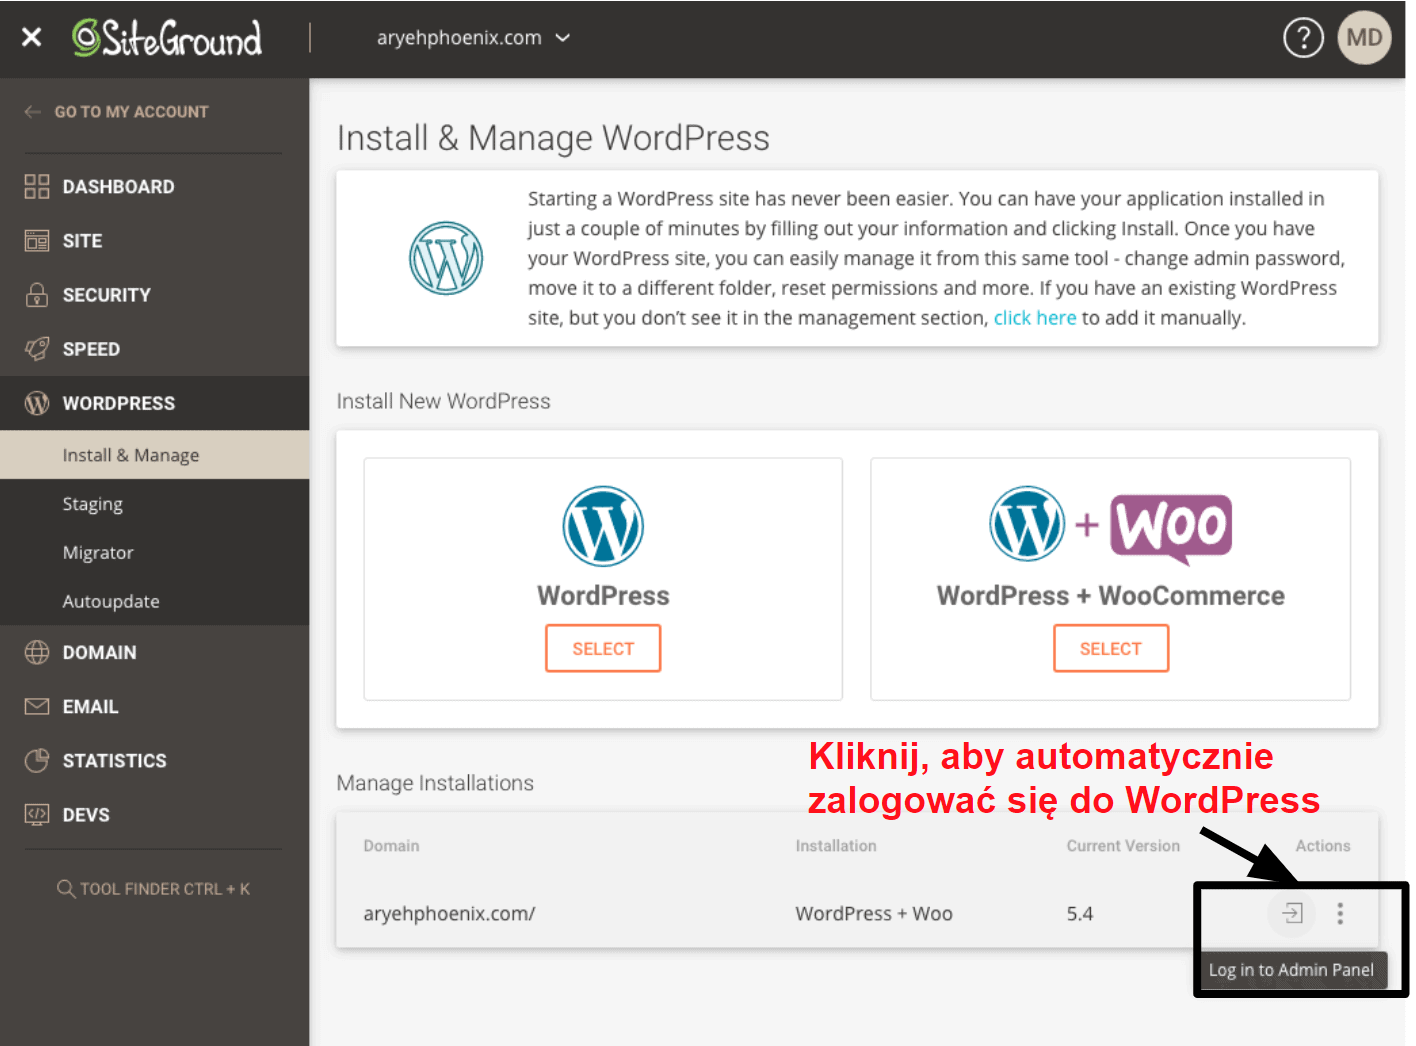 SiteGround offers a one click login option for your WordPress dashboard PL15